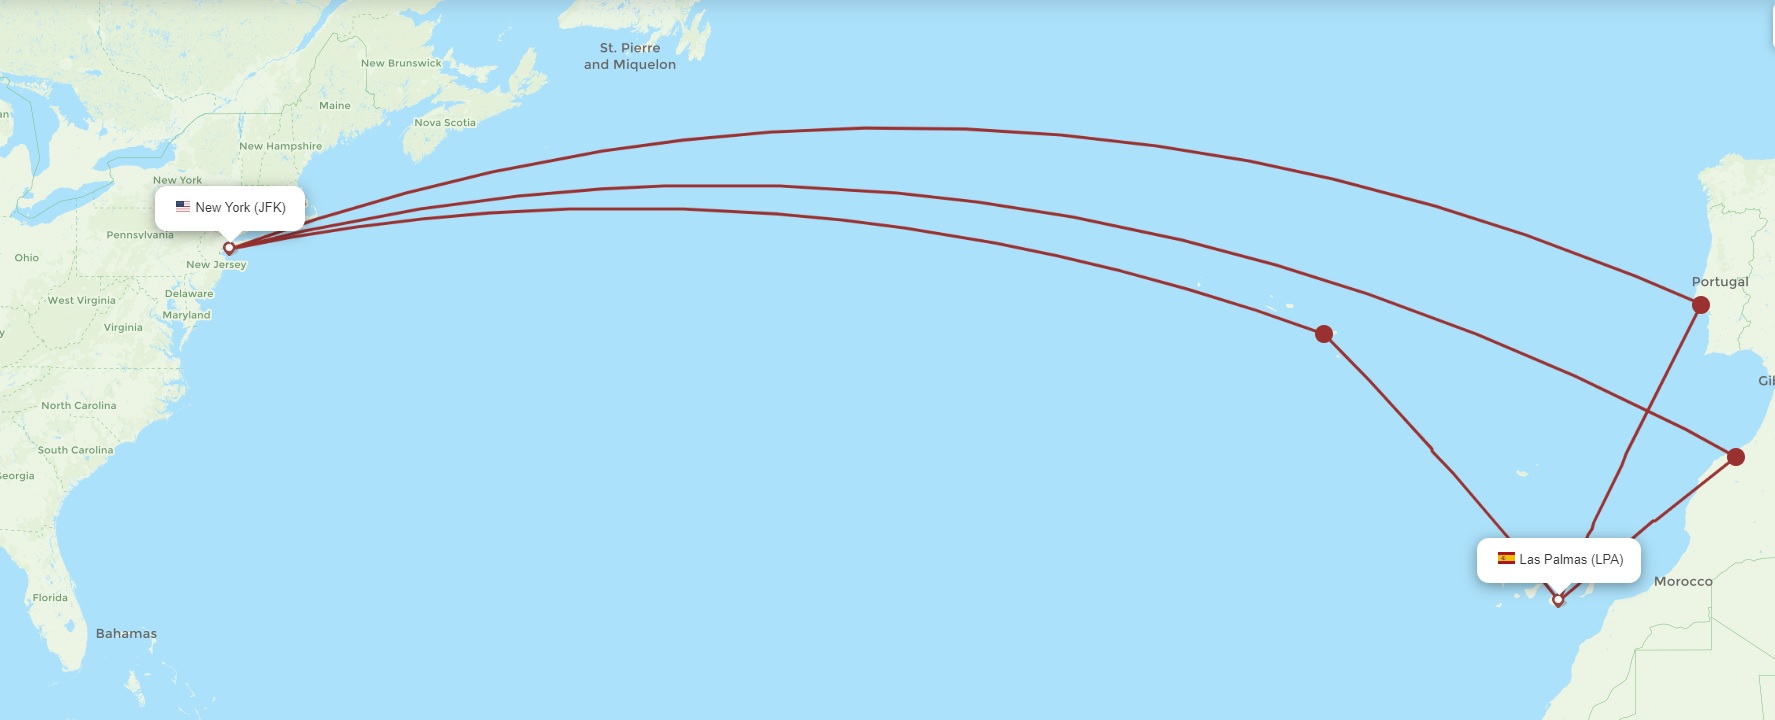 Connecting flights from New York (JFK) to Gran Canaria (LPA) (flightroutes.com)